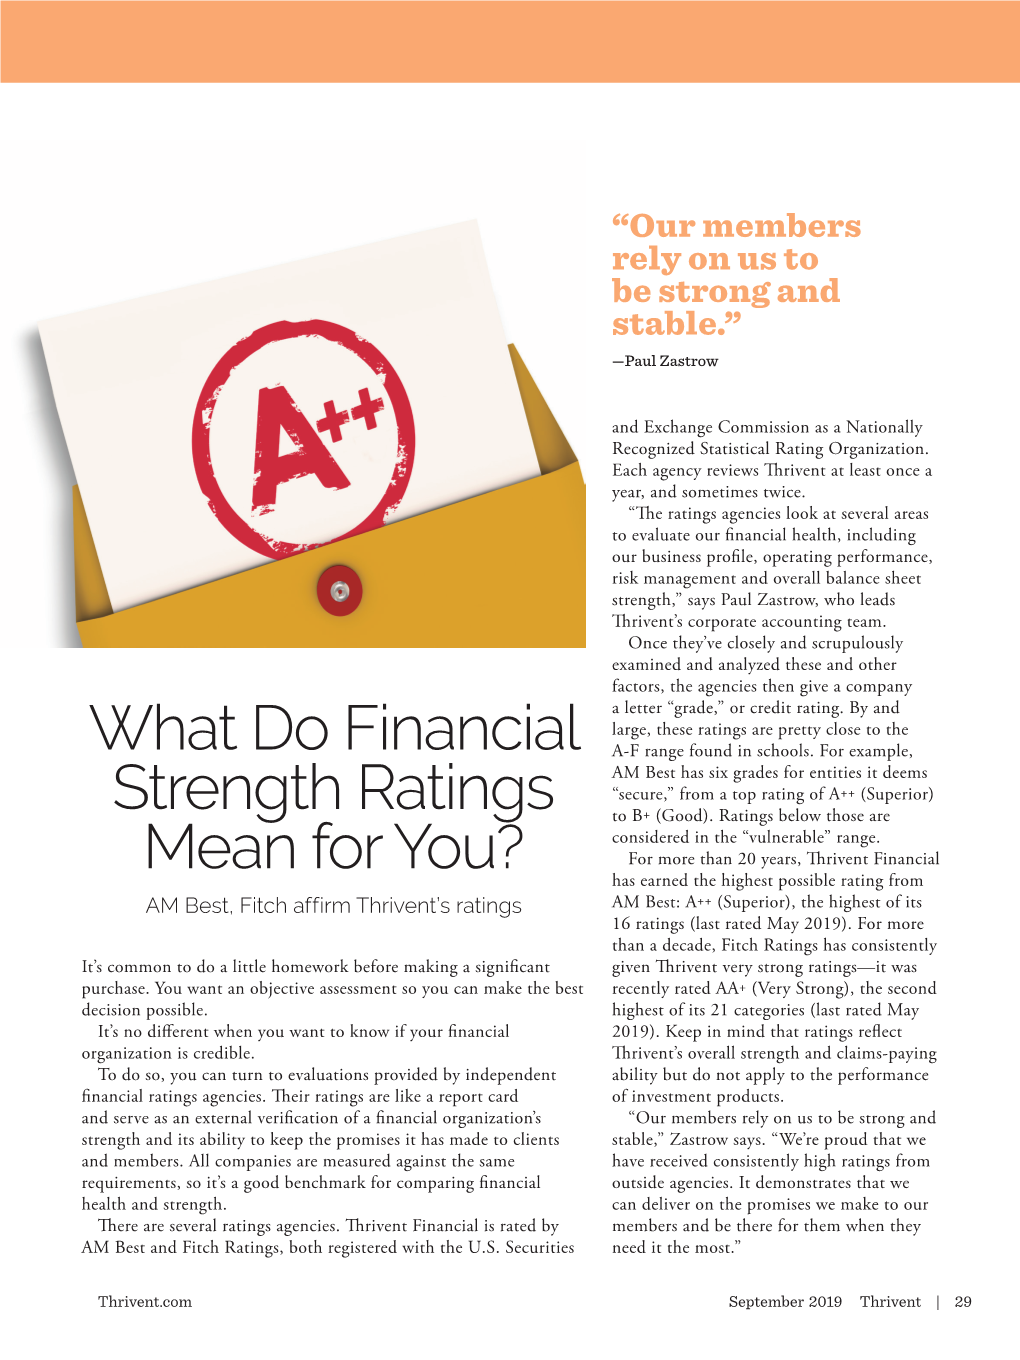 What Do Financial Strength Ratings Mean for You?